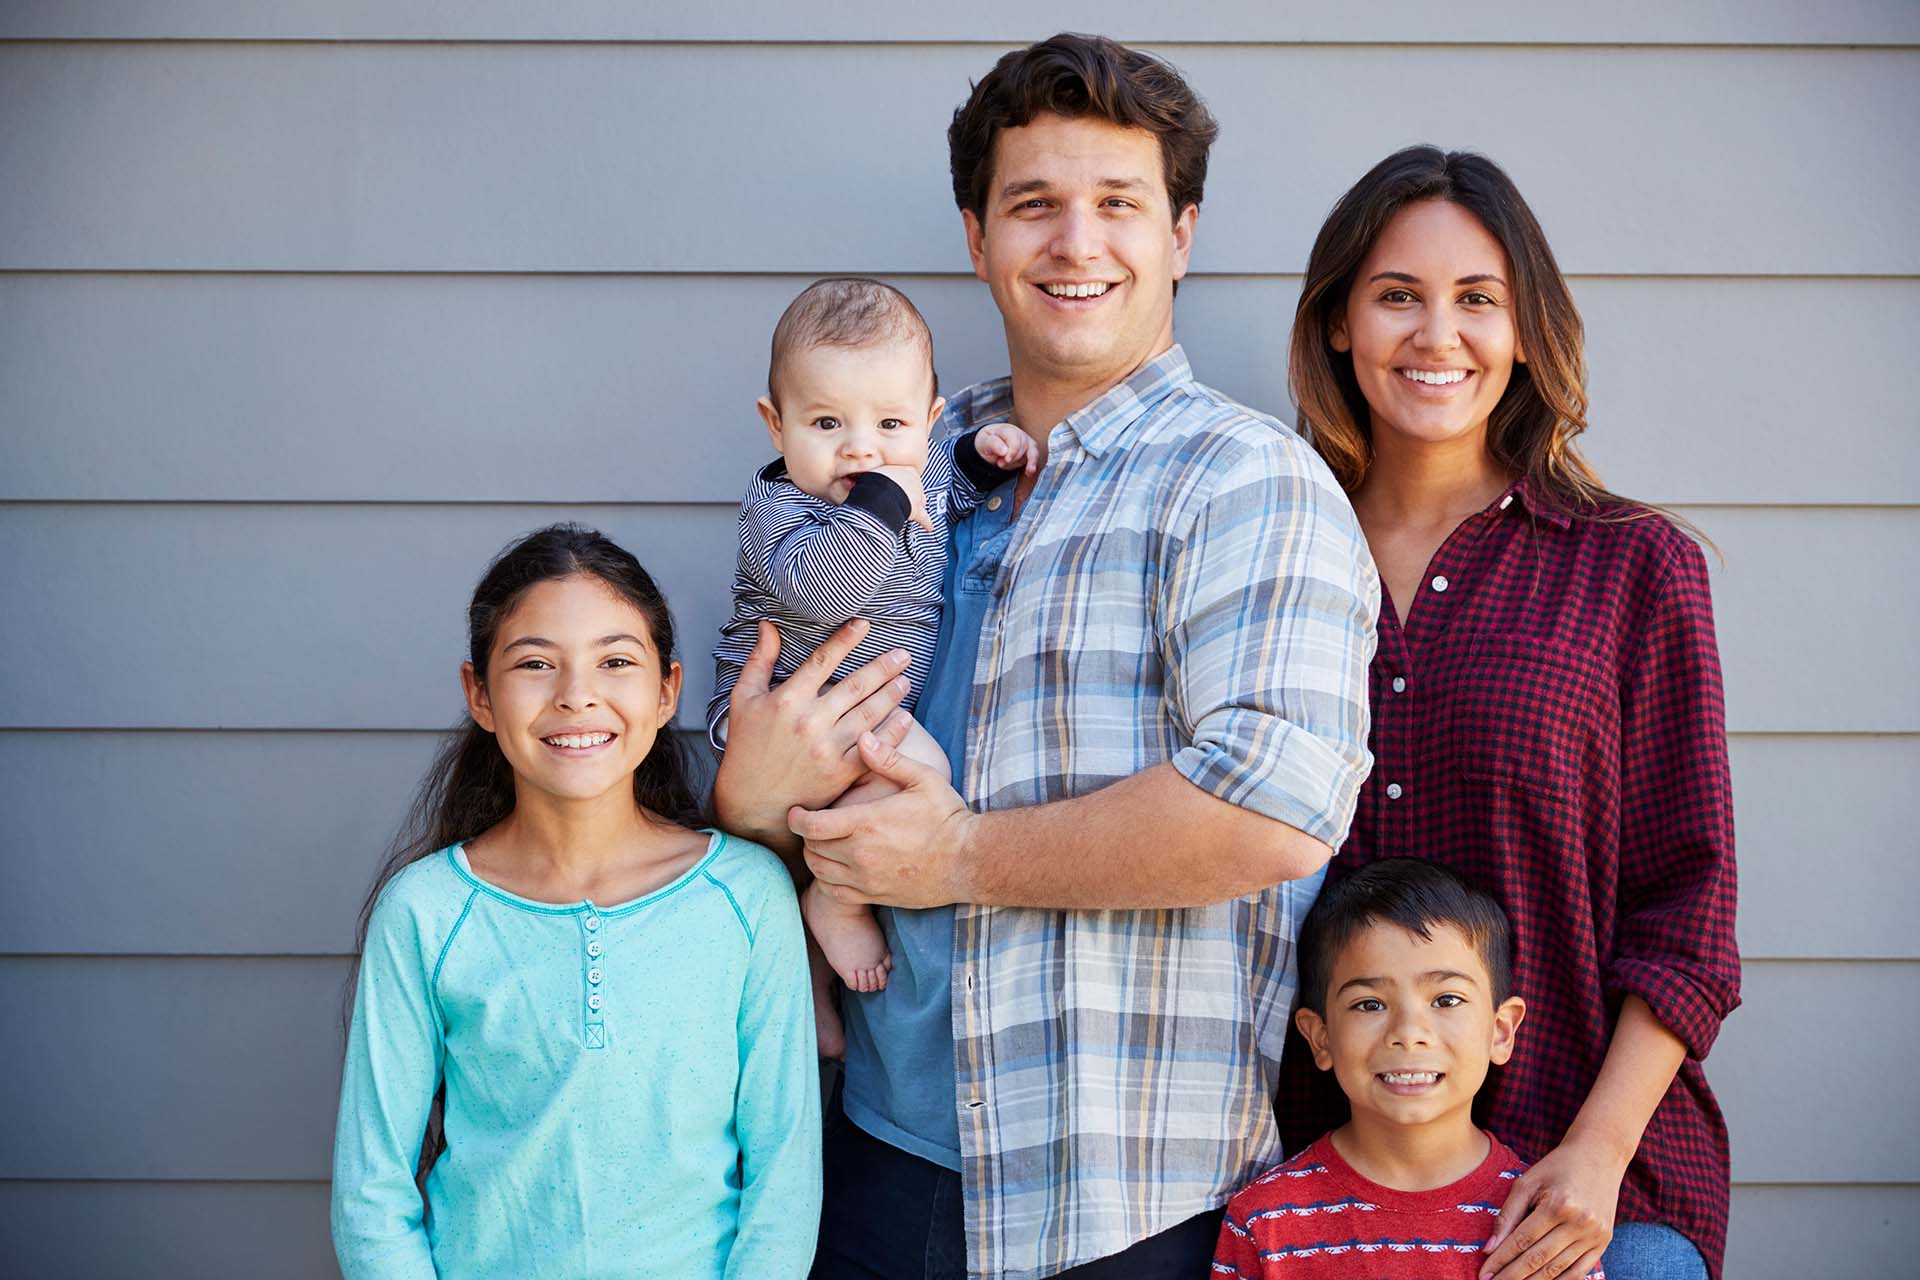 portrait of smiling family with 3 kids